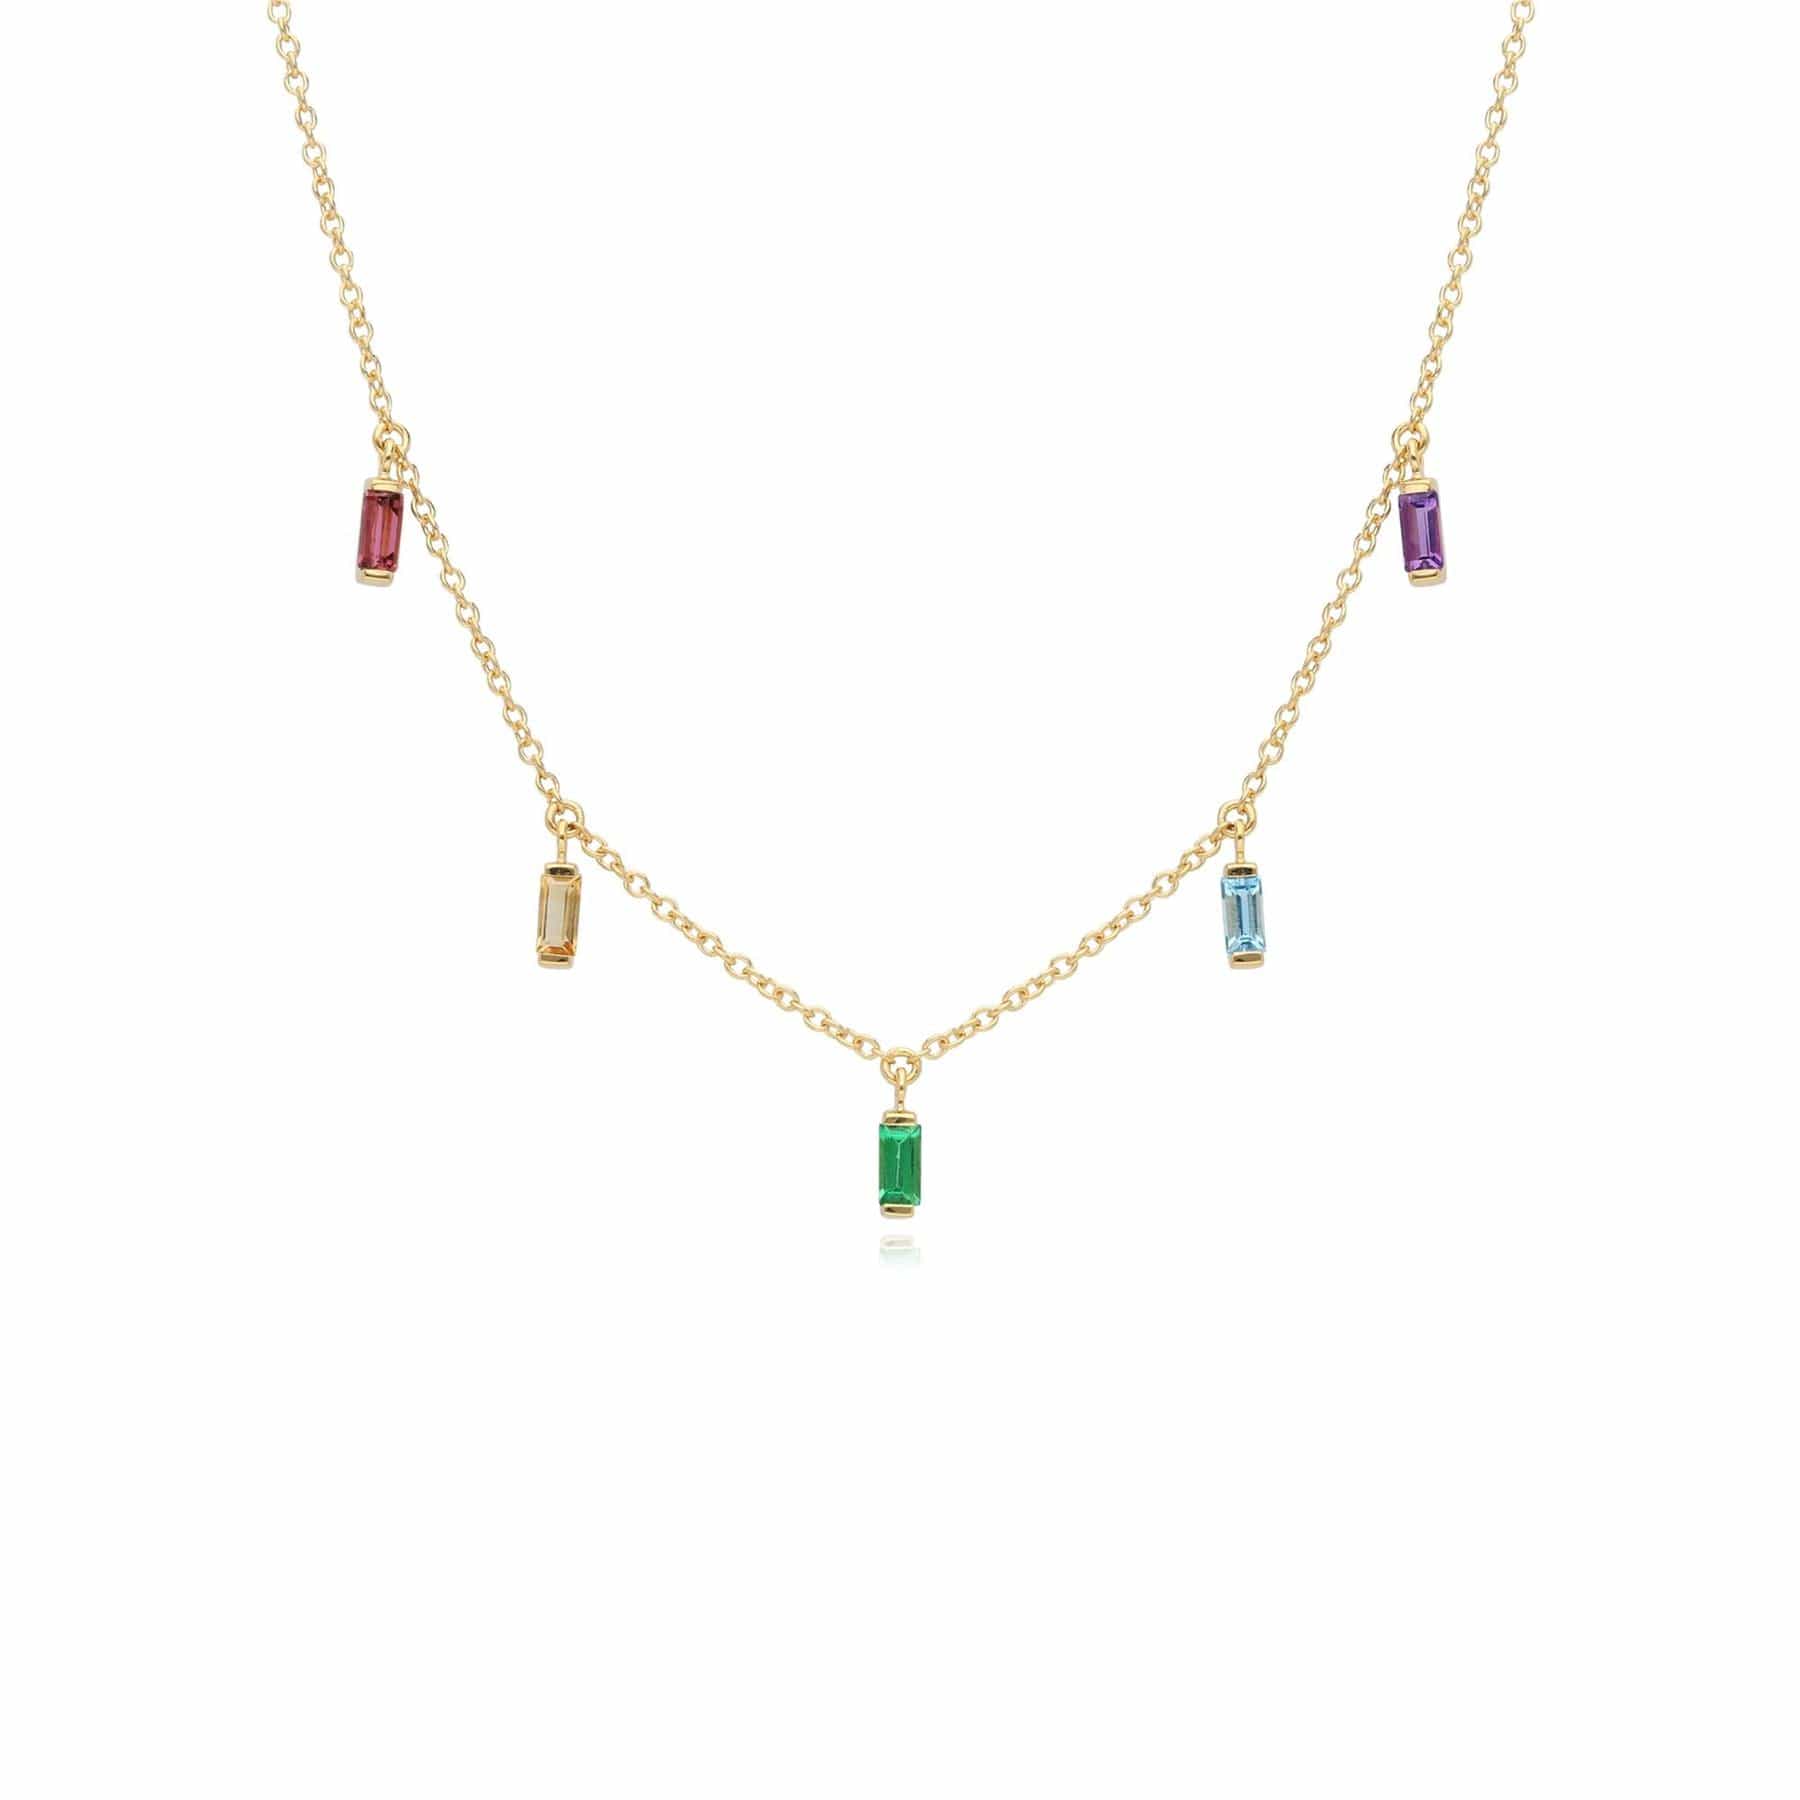 270N036601925 Rainbow Choker Necklace in Gold Plated Sterling Silver 1